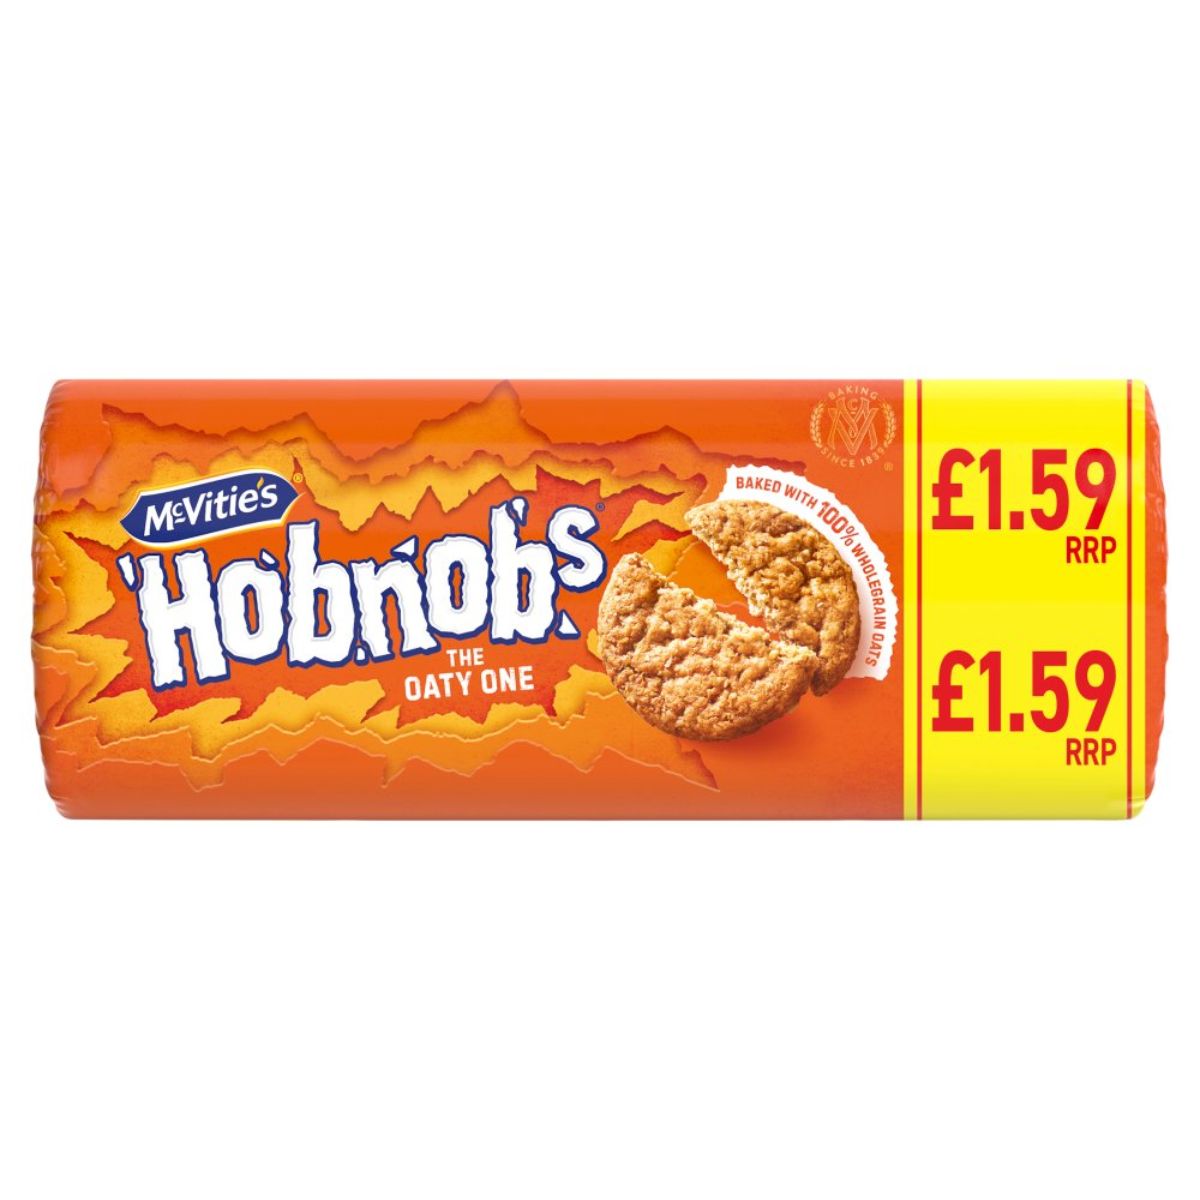 McVities - Hobnobs Biscuits The Oaty One - 255g McVities - Hobnobs Biscuits The Oaty One - 255g McVities - Hobnobs Biscuits The Oaty One - 255g McVities - Hobnobs Biscuits The Oaty One - 255g McVities - Hobnobs Biscuits The Oaty One - 255g McVities - Hobnobs Biscuits The Oaty One - 255g McVities - Hobnobs Biscuits The Oaty One -
Sentence: McVitites hobbs biscuits the oaty one hobbs.